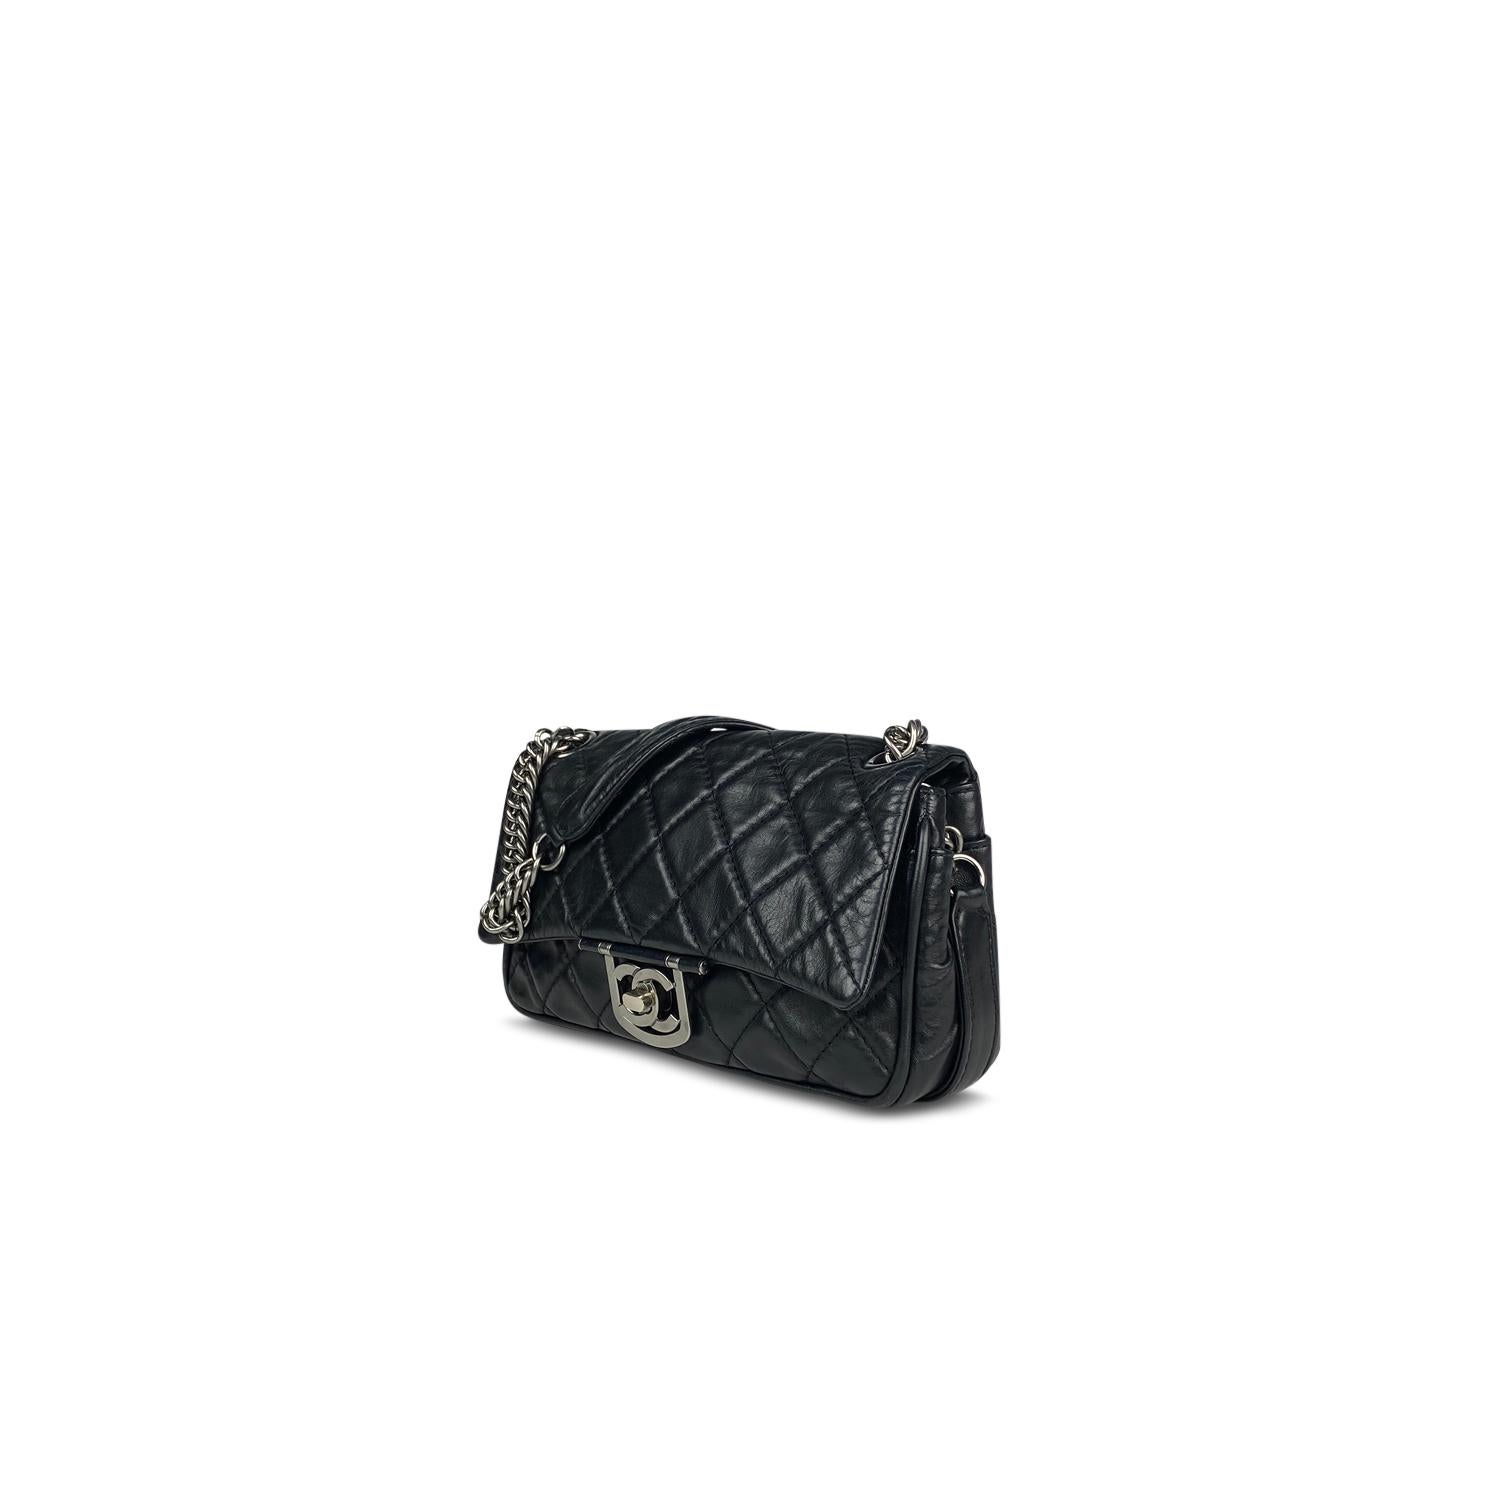 Black soft quilted lamb leather Chanel New Flap bag with

– Silver-tone hardware
– Chain-link and leather shoulder strap
– Tonal leather lining
– Three interior compartments, single zip pocket at interior wall and CC turn-lock closure at front